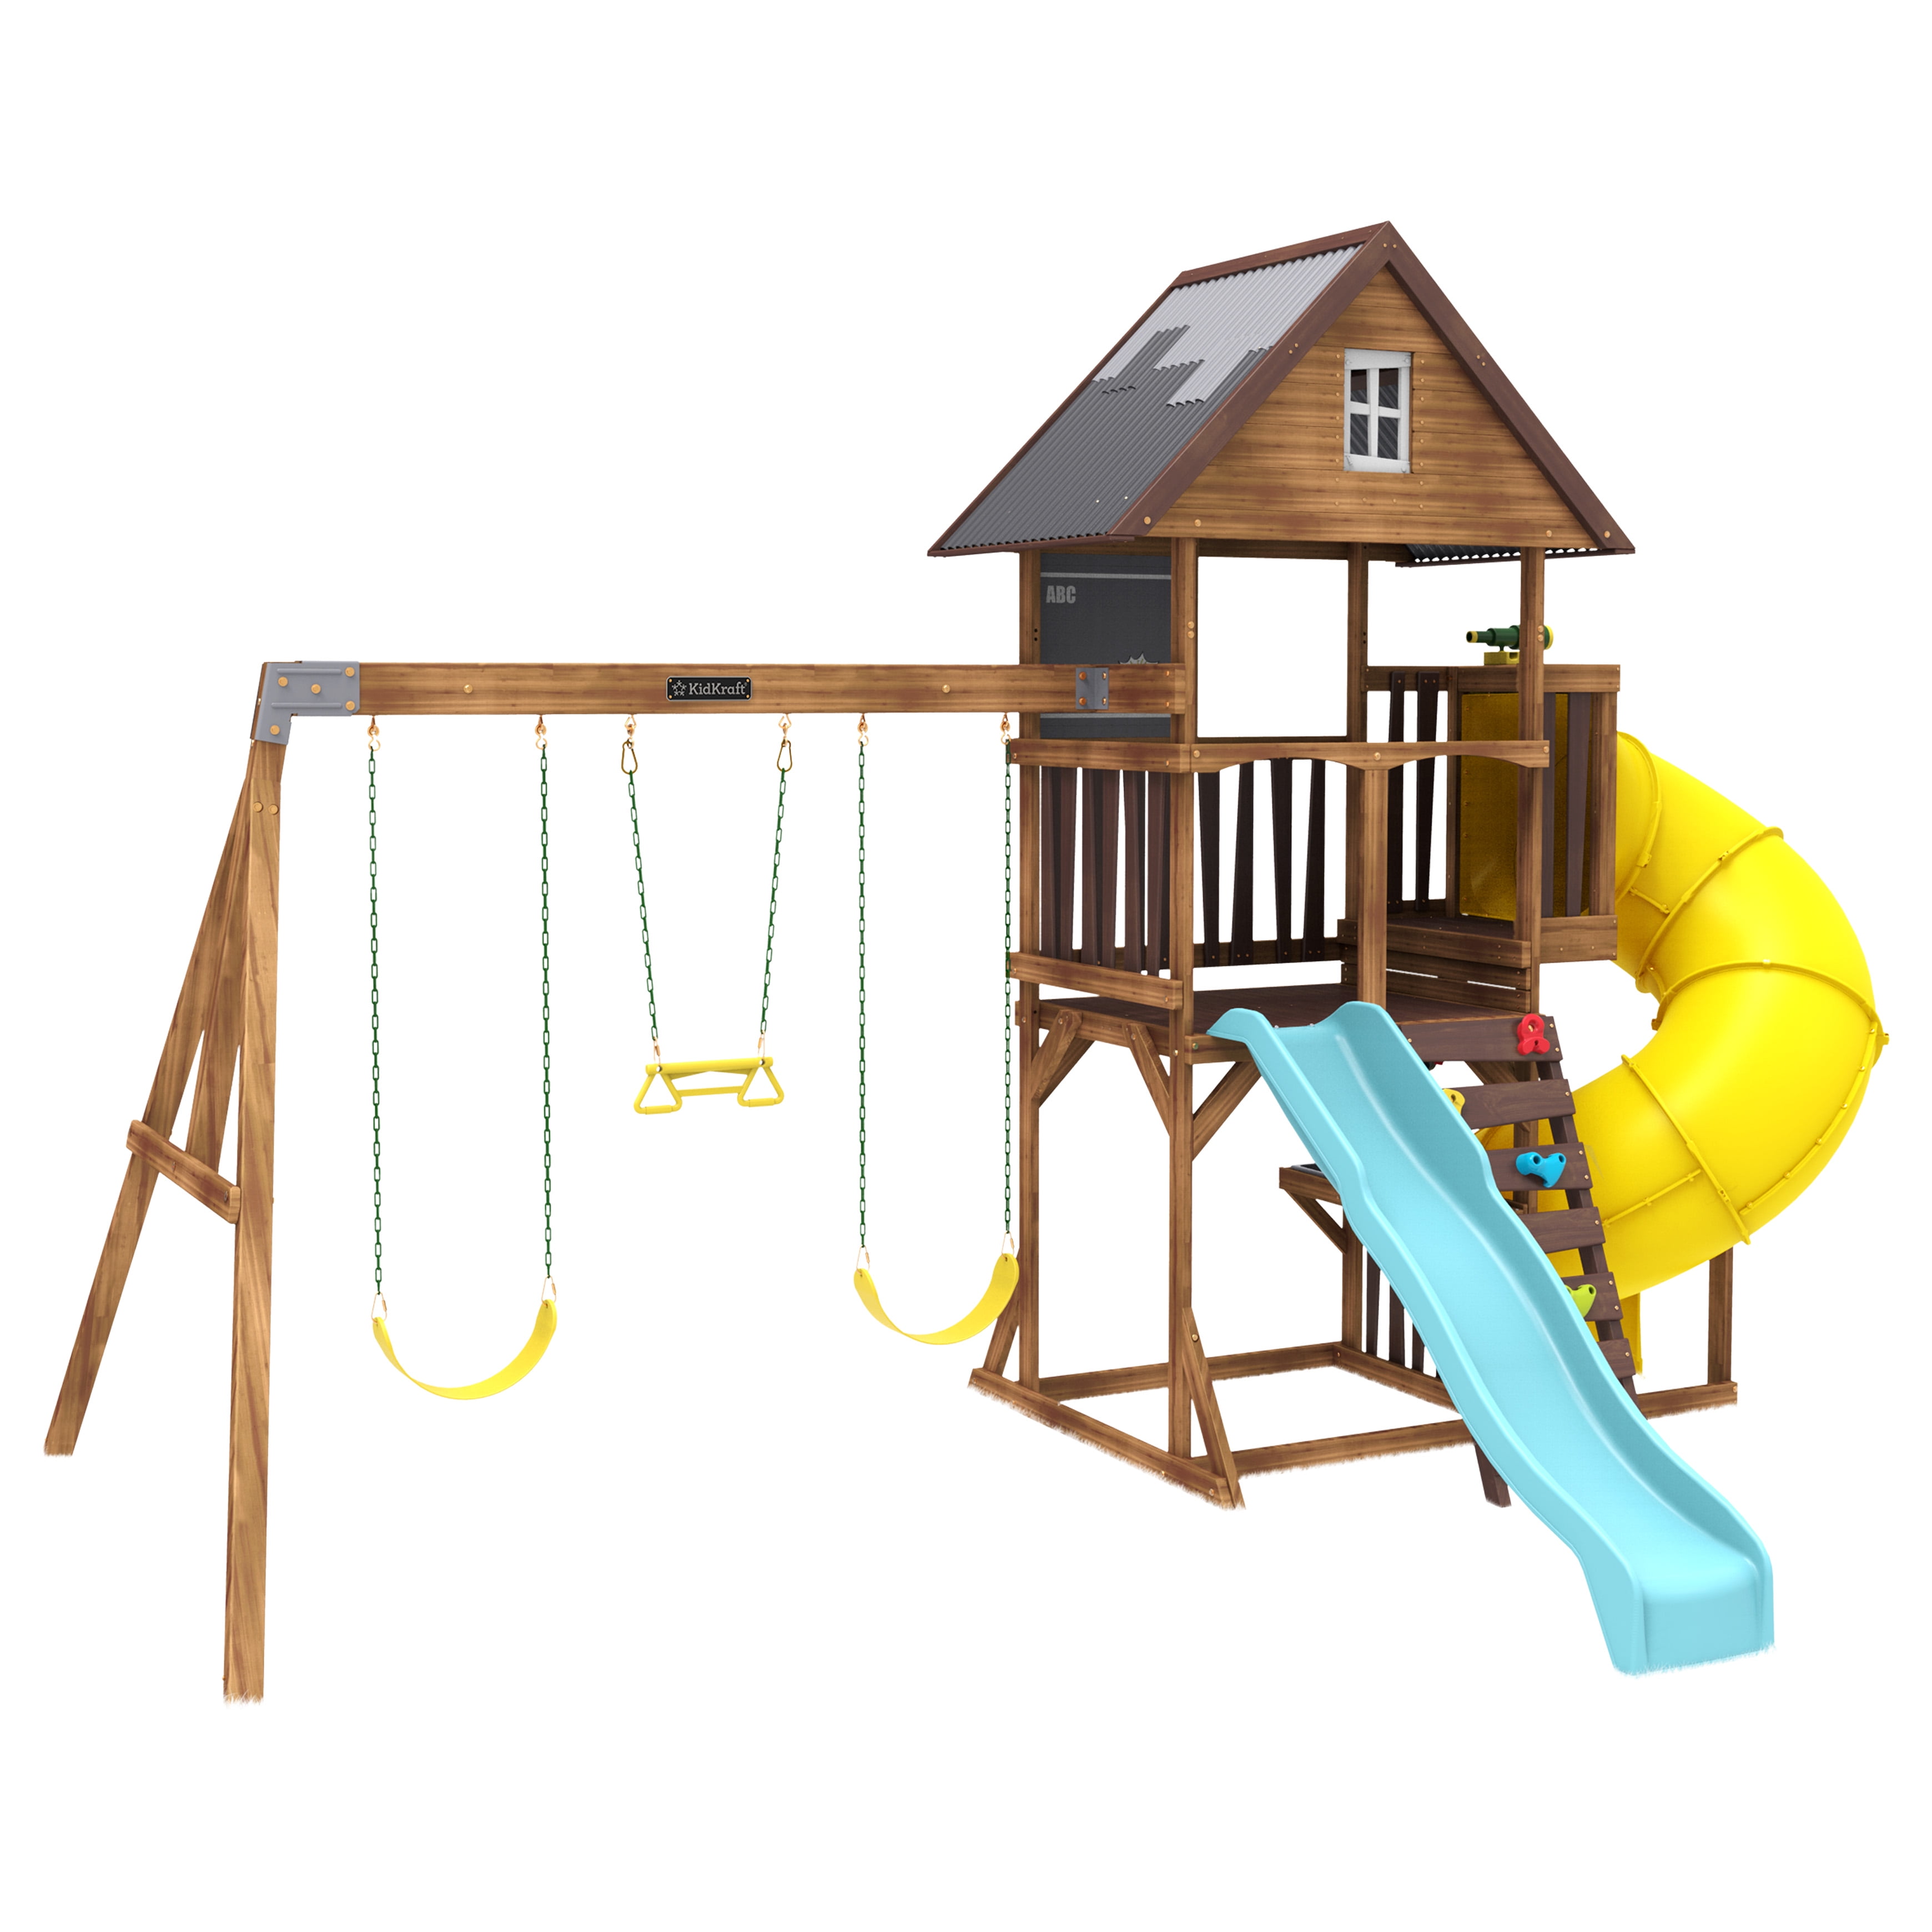 Twisty Tower Wooden Swing Set, Wooden Playhouse With Slide And Swing